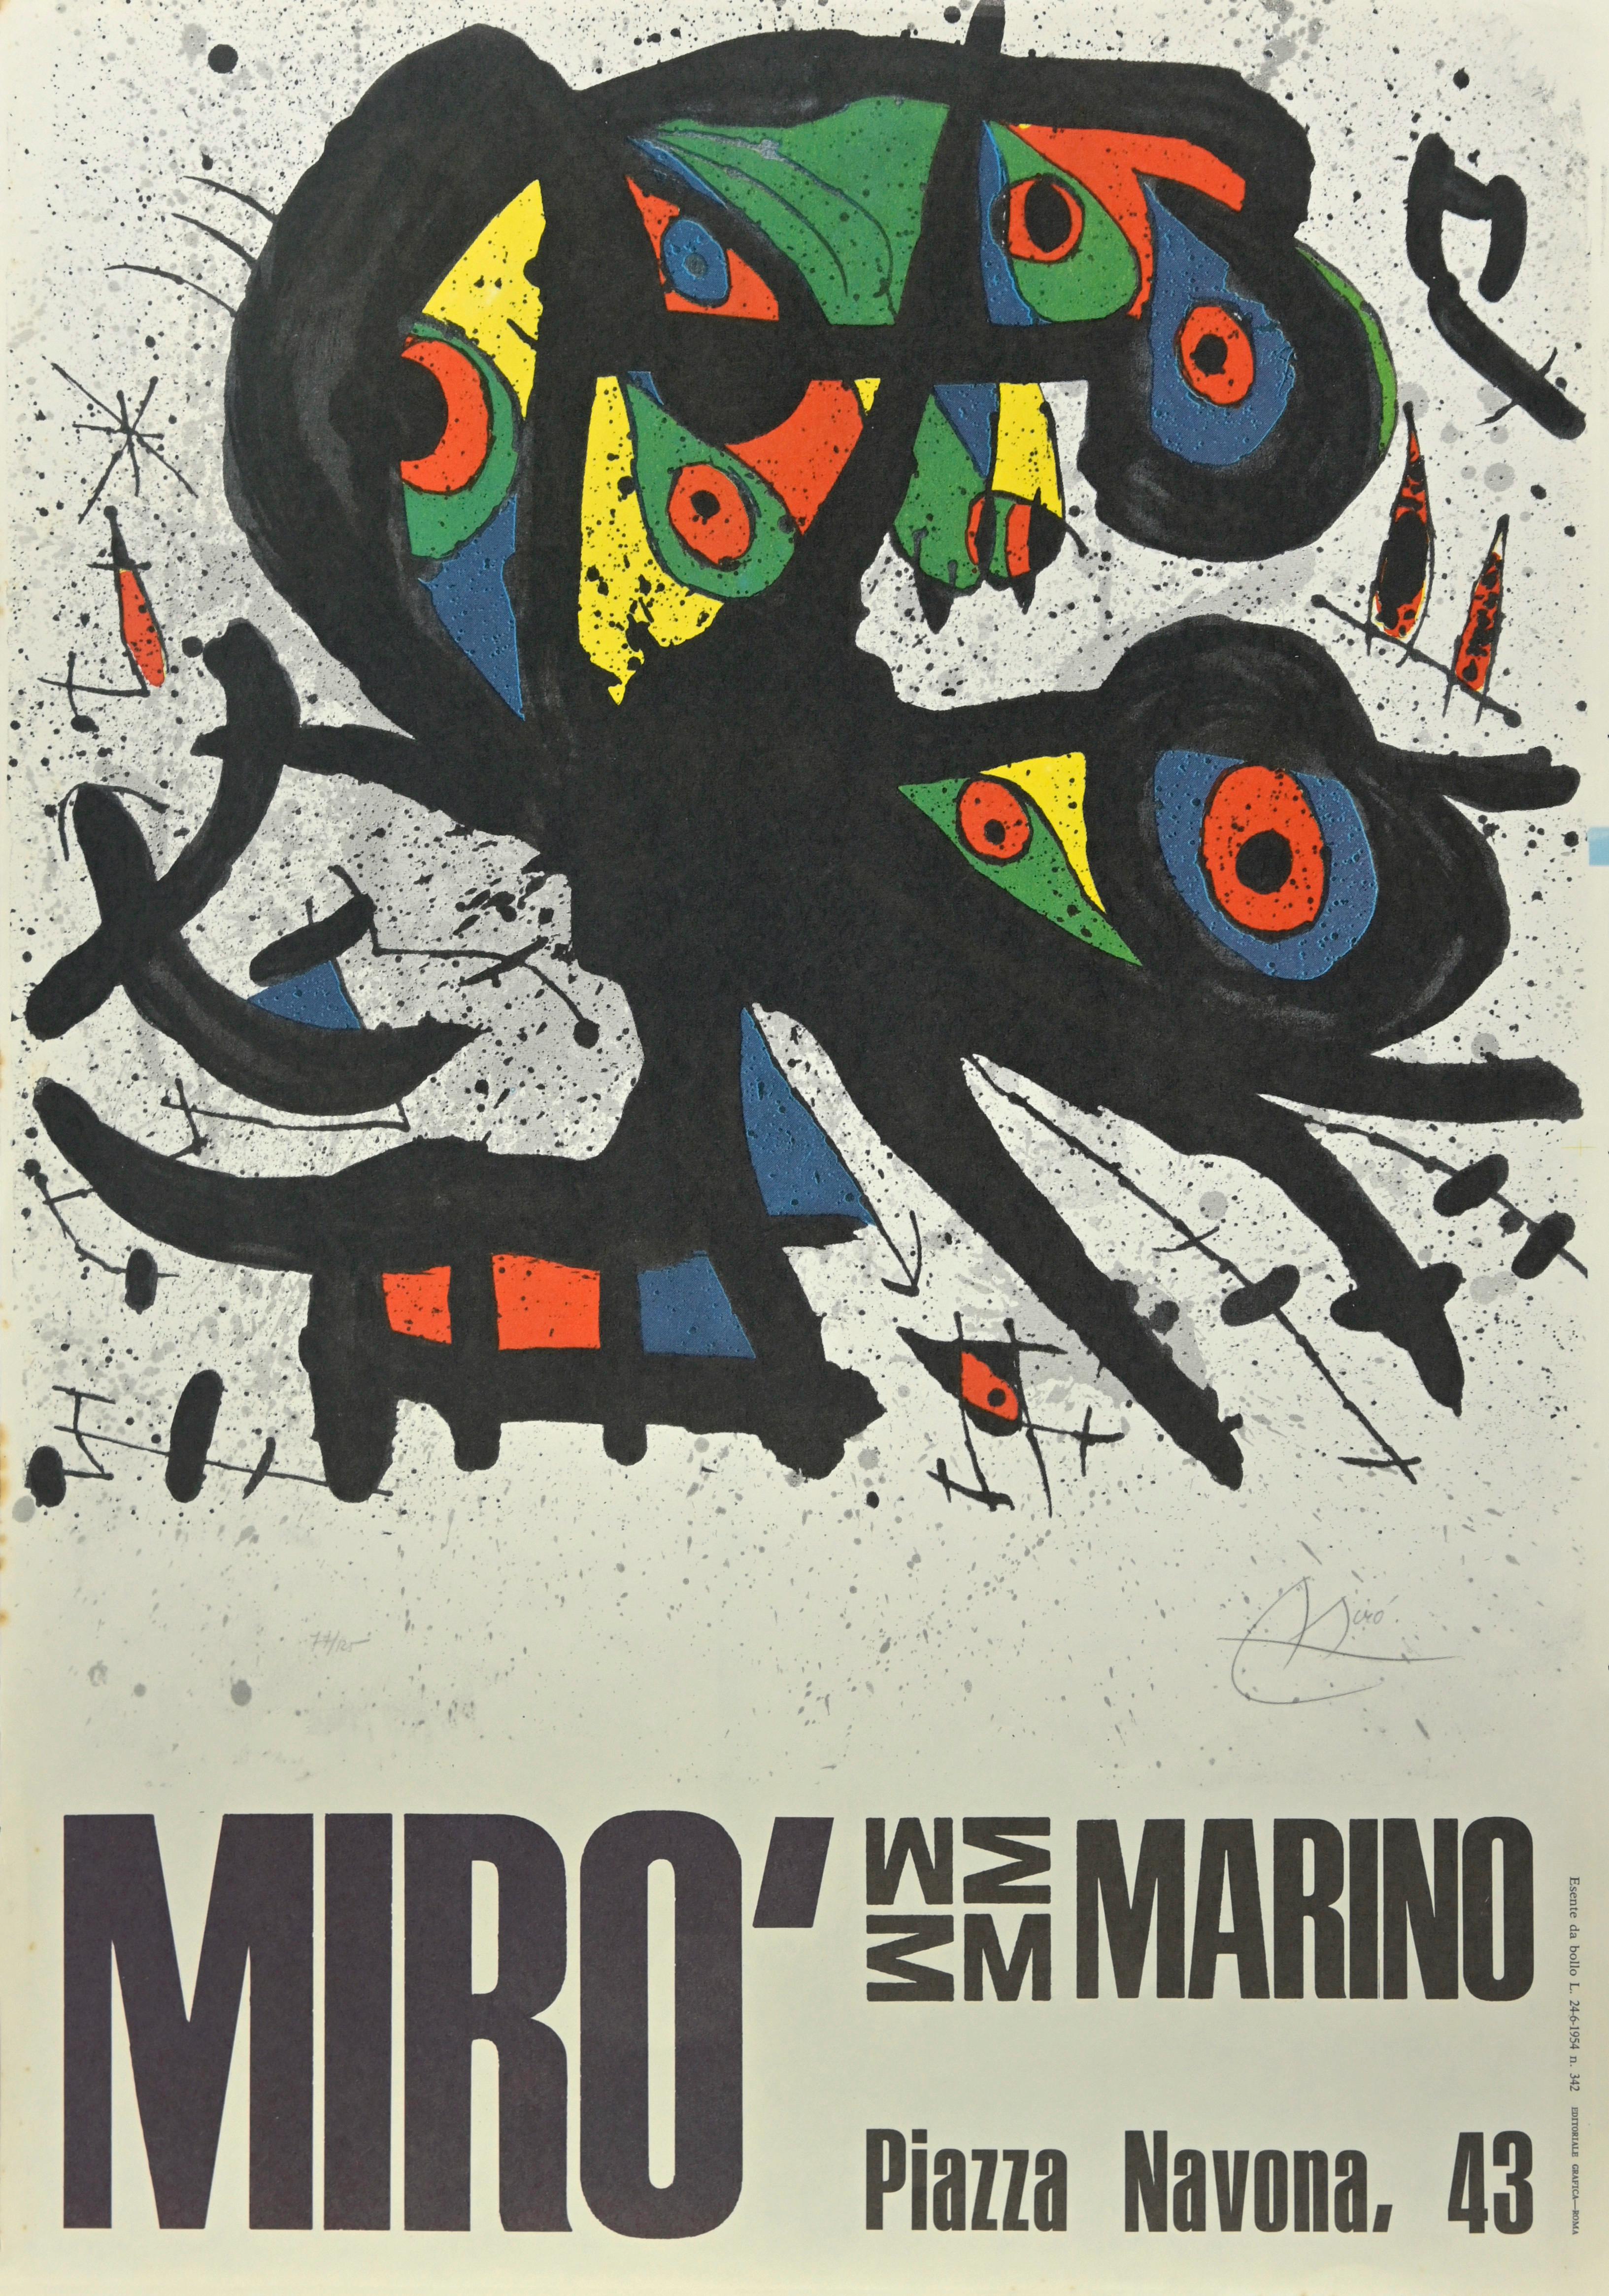 "Miró Exhibition Poster " is a vintage  photo-offset print realized after Joan Miró in 1971, it comes from one of the Italian Exhibition posters of the artist, held in Rome, Piazza Navona, 43 in Marino.

Perfect conditions, signed in the plate.

The